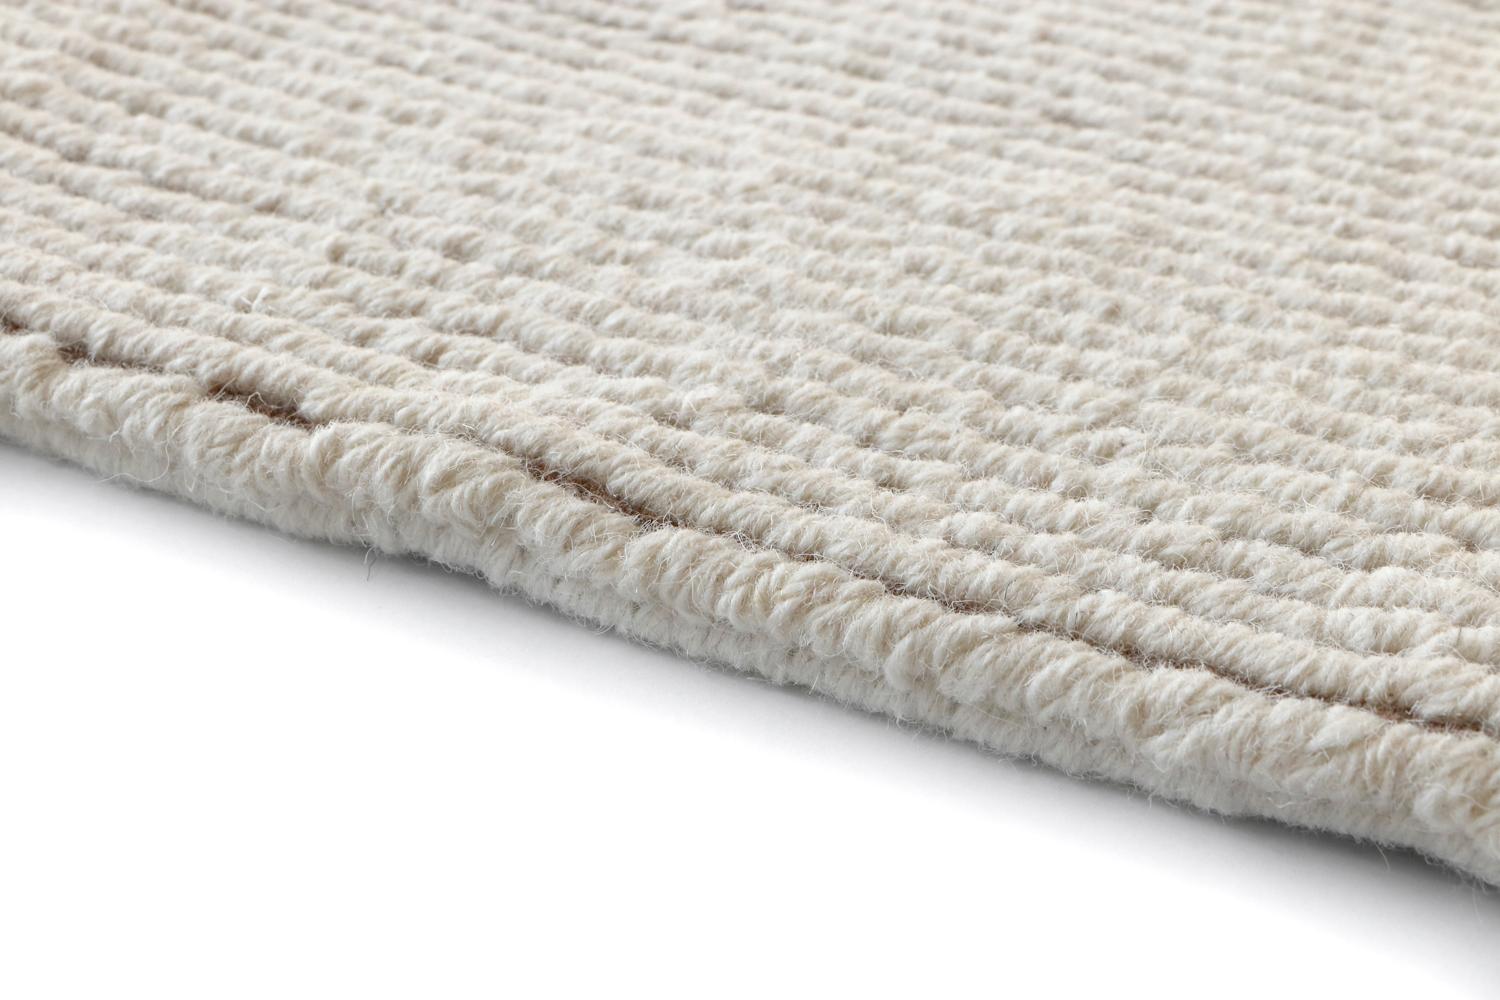 21st Cent Warm Ivory Wool Durable Rug by Deanna Comellini In Stock 170x240 cm For Sale 1